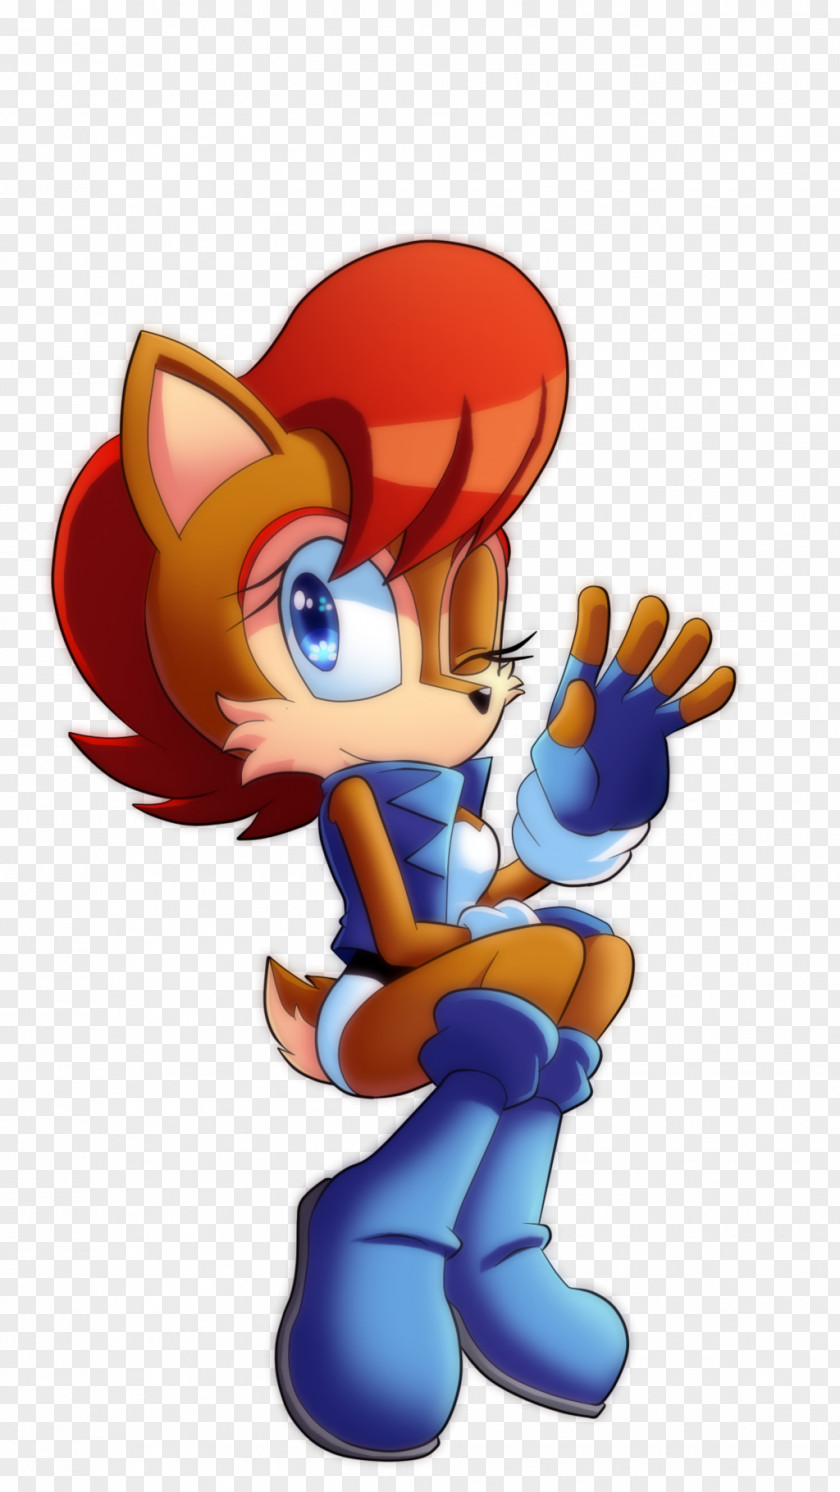 Acorn Sonic The Hedgehog Unleashed Princess Sally Amy Rose PNG